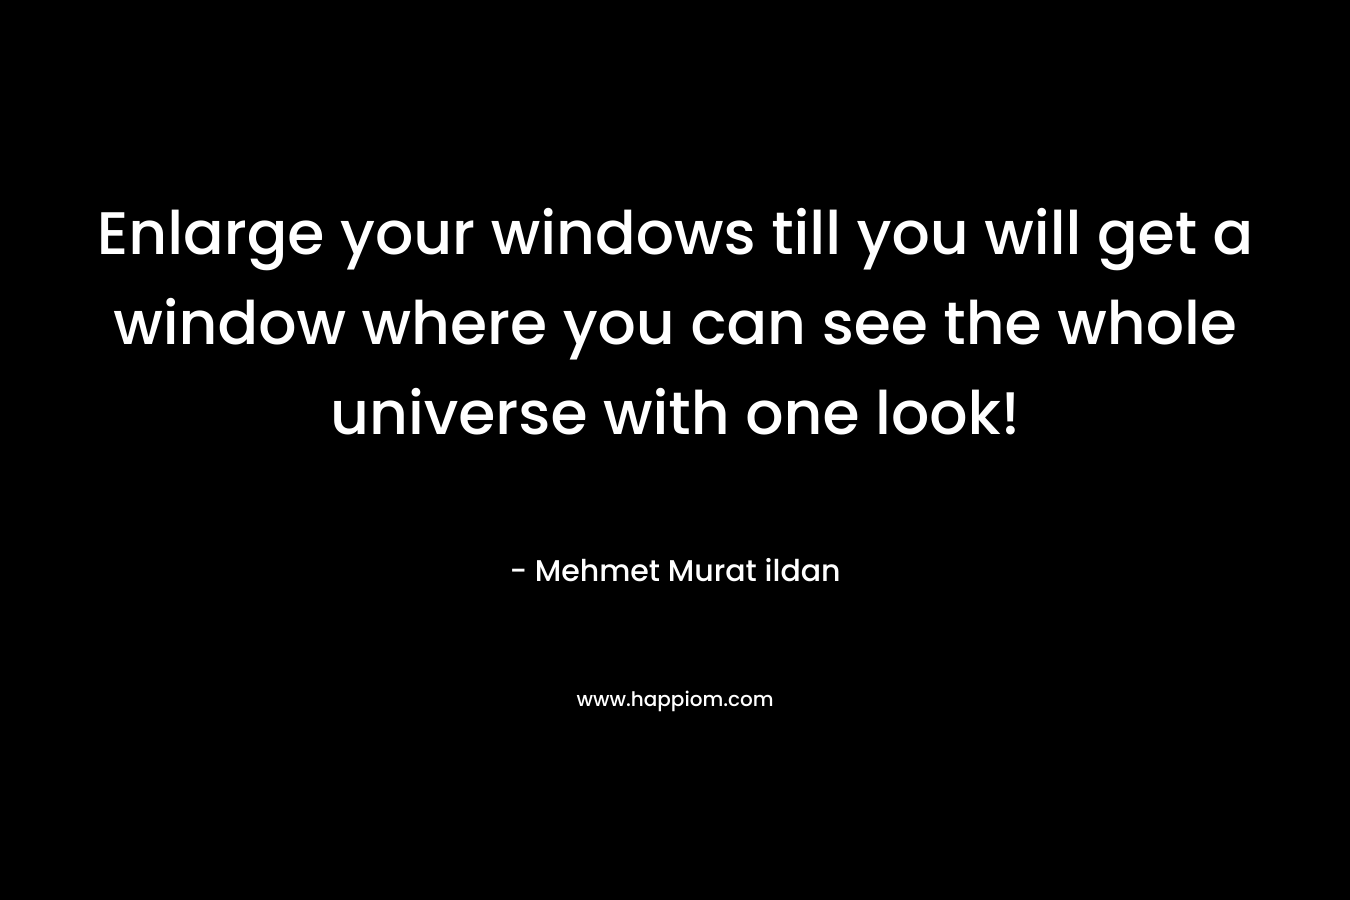 Enlarge your windows till you will get a window where you can see the whole universe with one look! – Mehmet Murat ildan